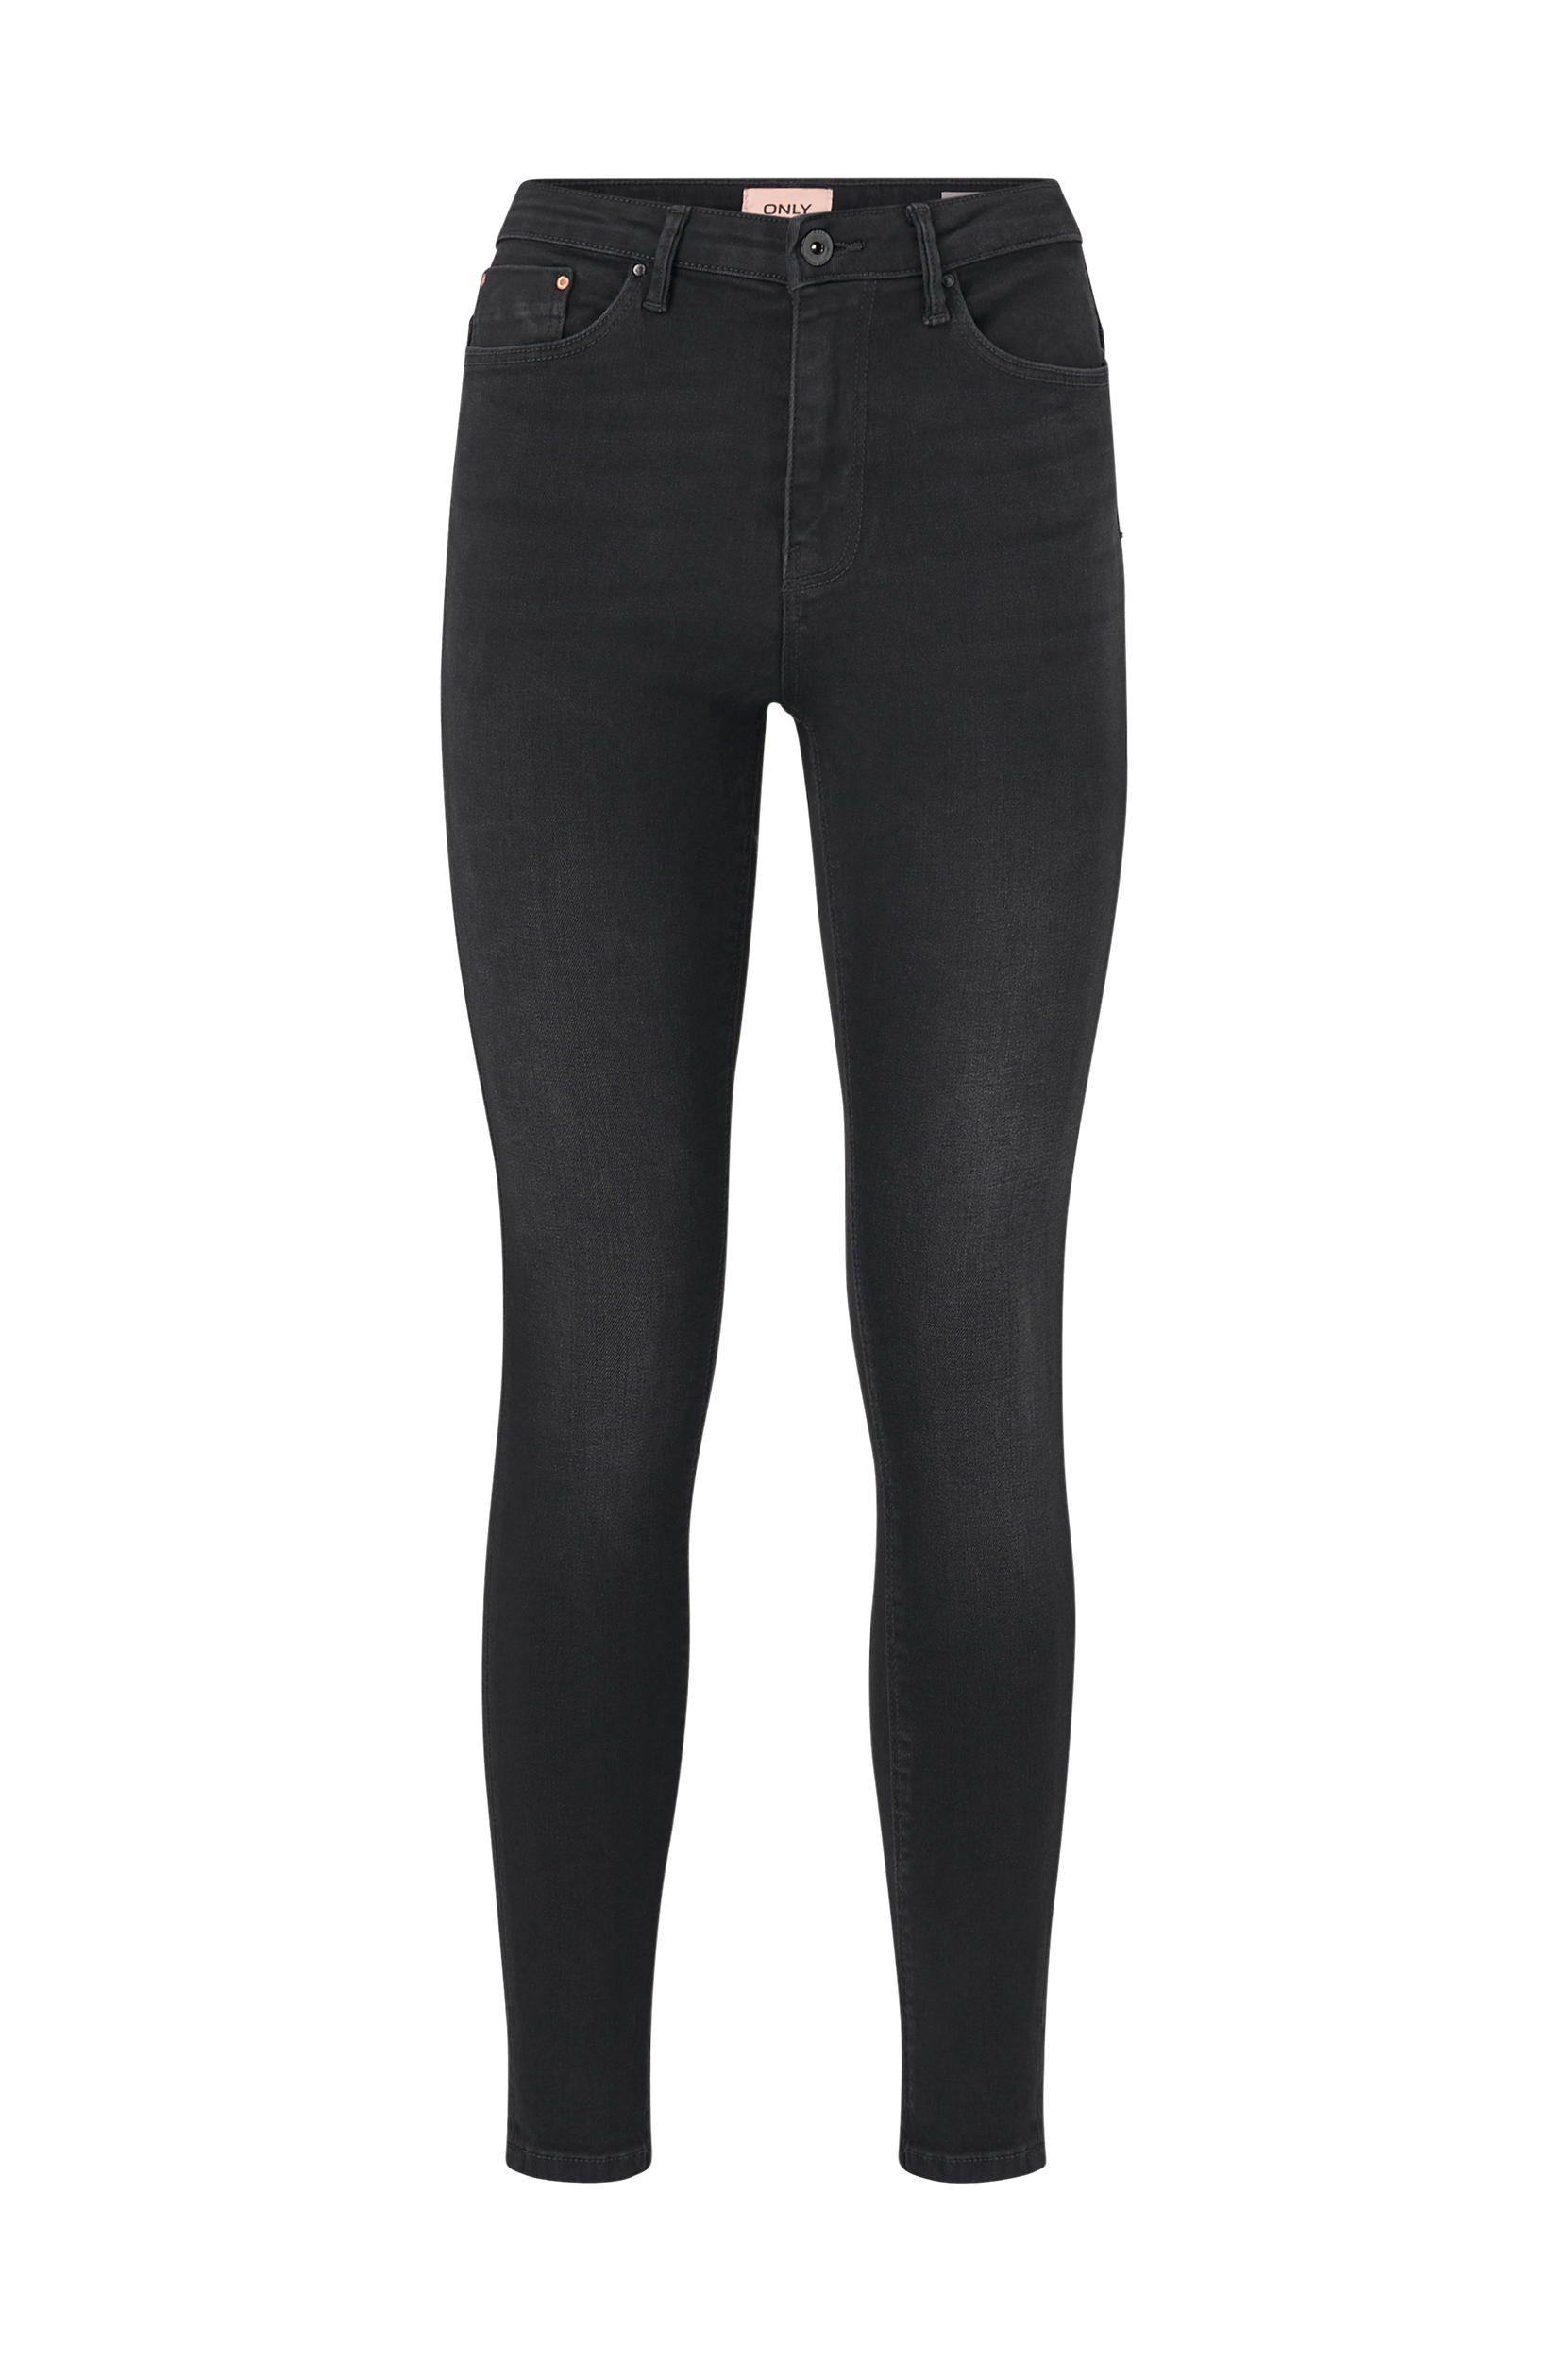 Only - Jeans onlPaola High Waist Skinny - Sort - W29/L34